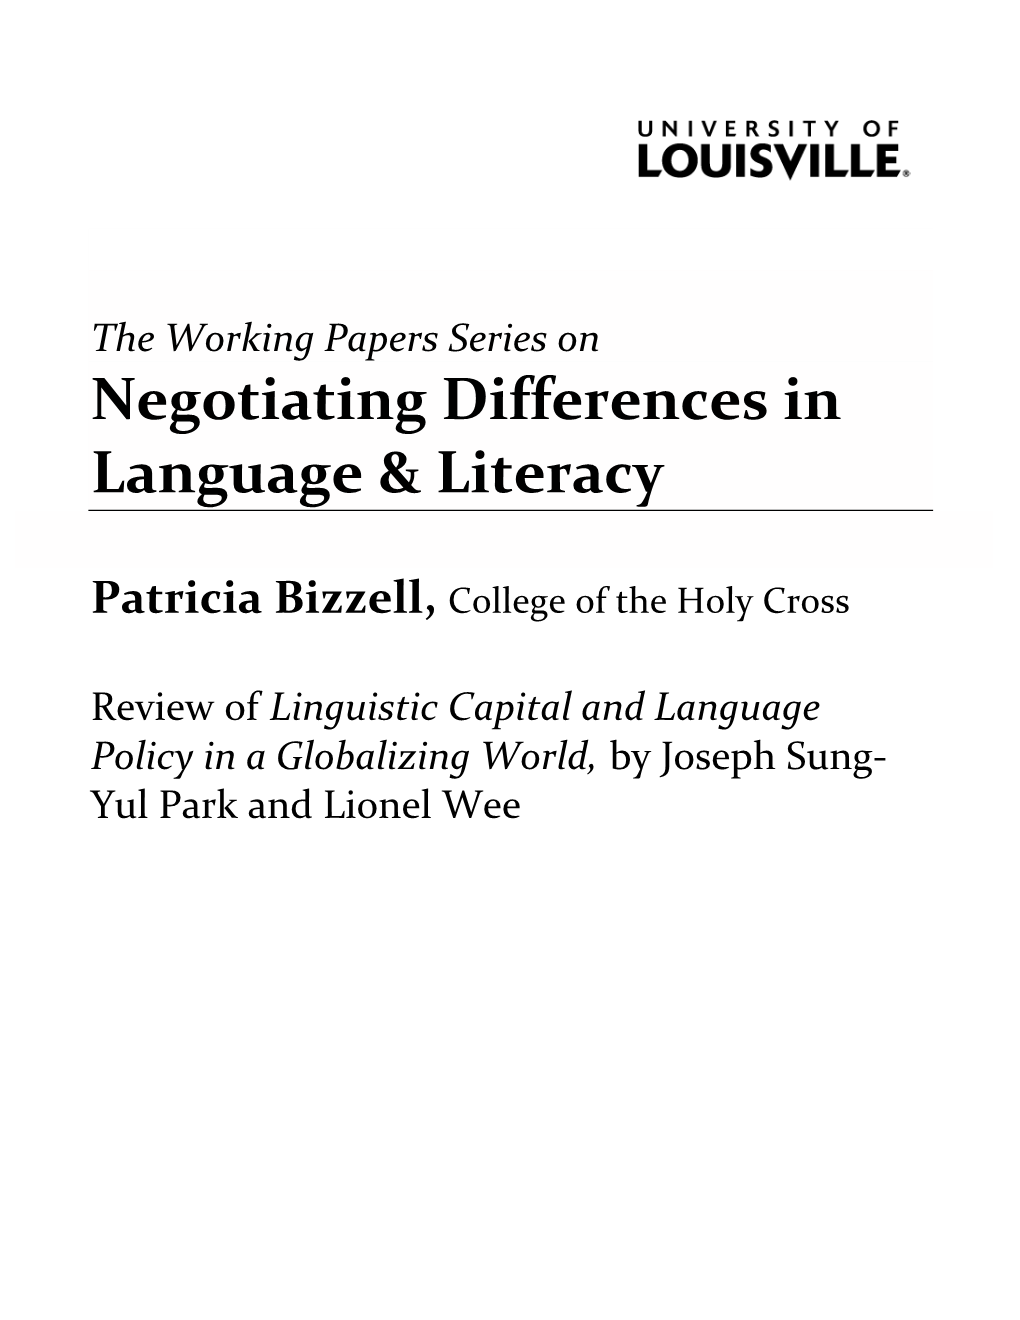 Review of Linguistic Capital and Language Policy in a Globalizing World, by Joseph Sung- Yul Park and Lionel Wee